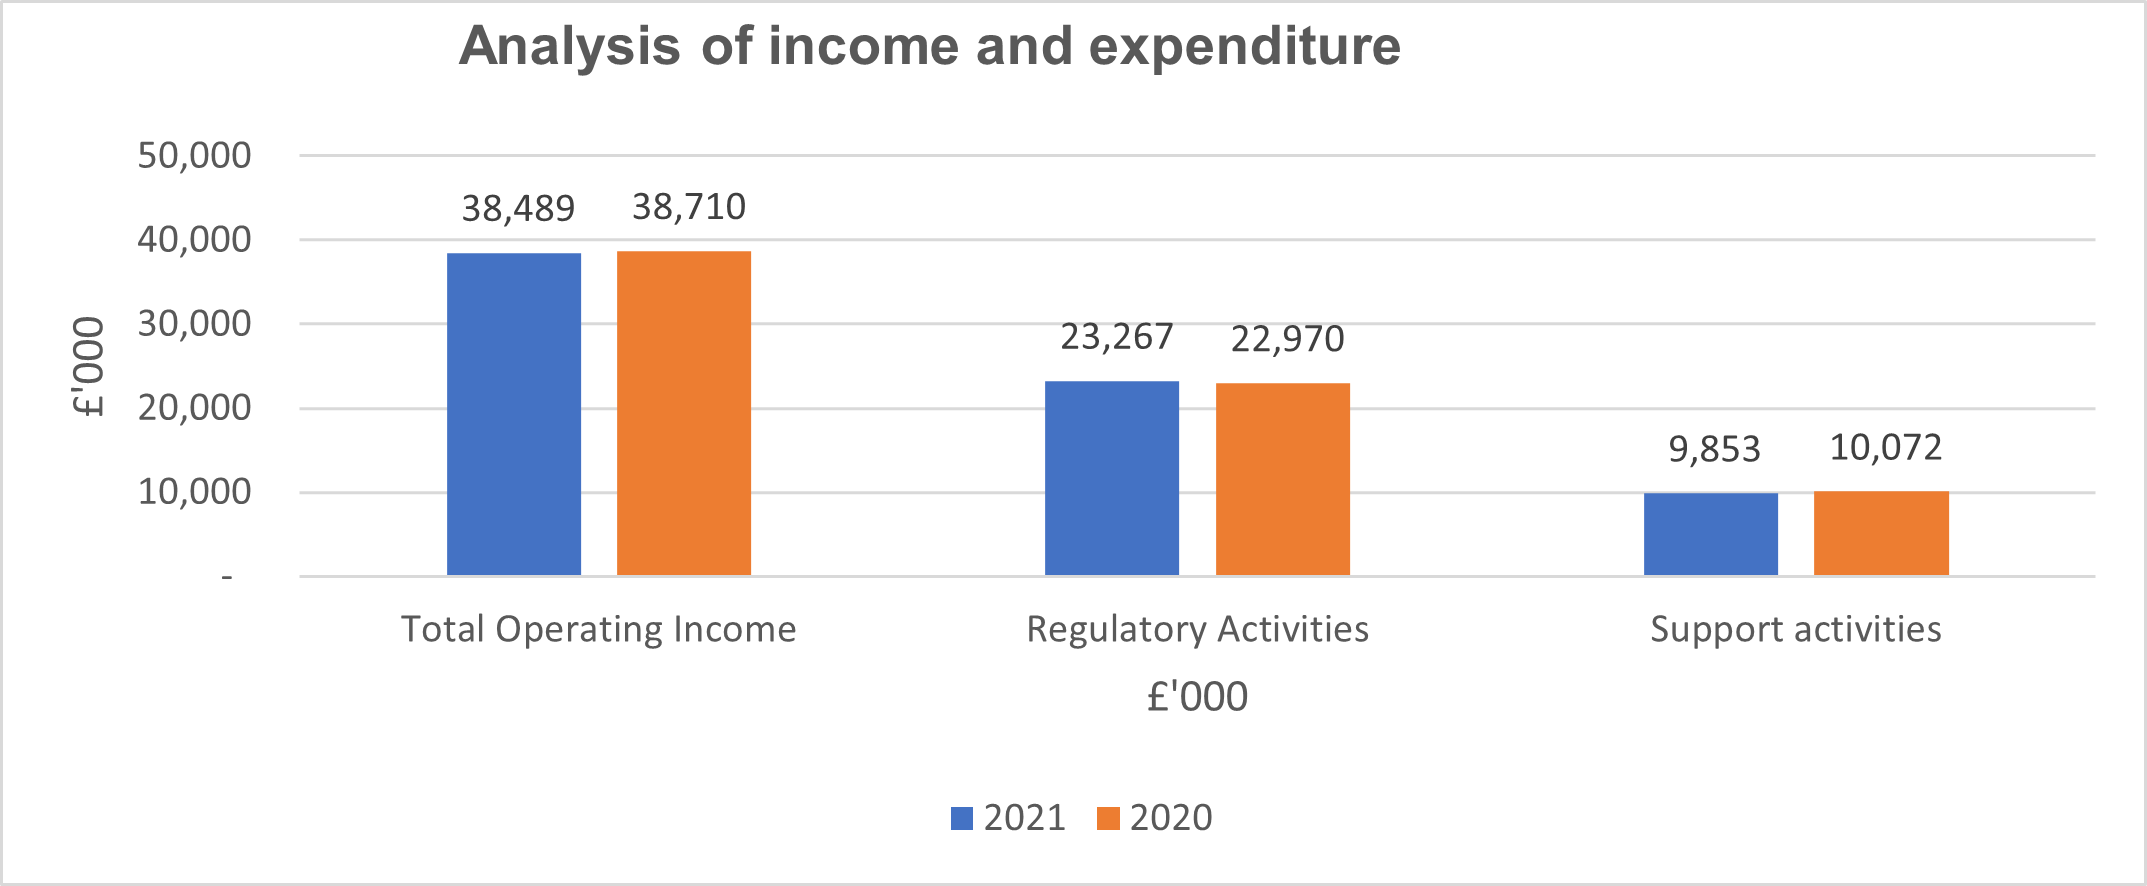 Bar chart showing analysis of income and expenditure